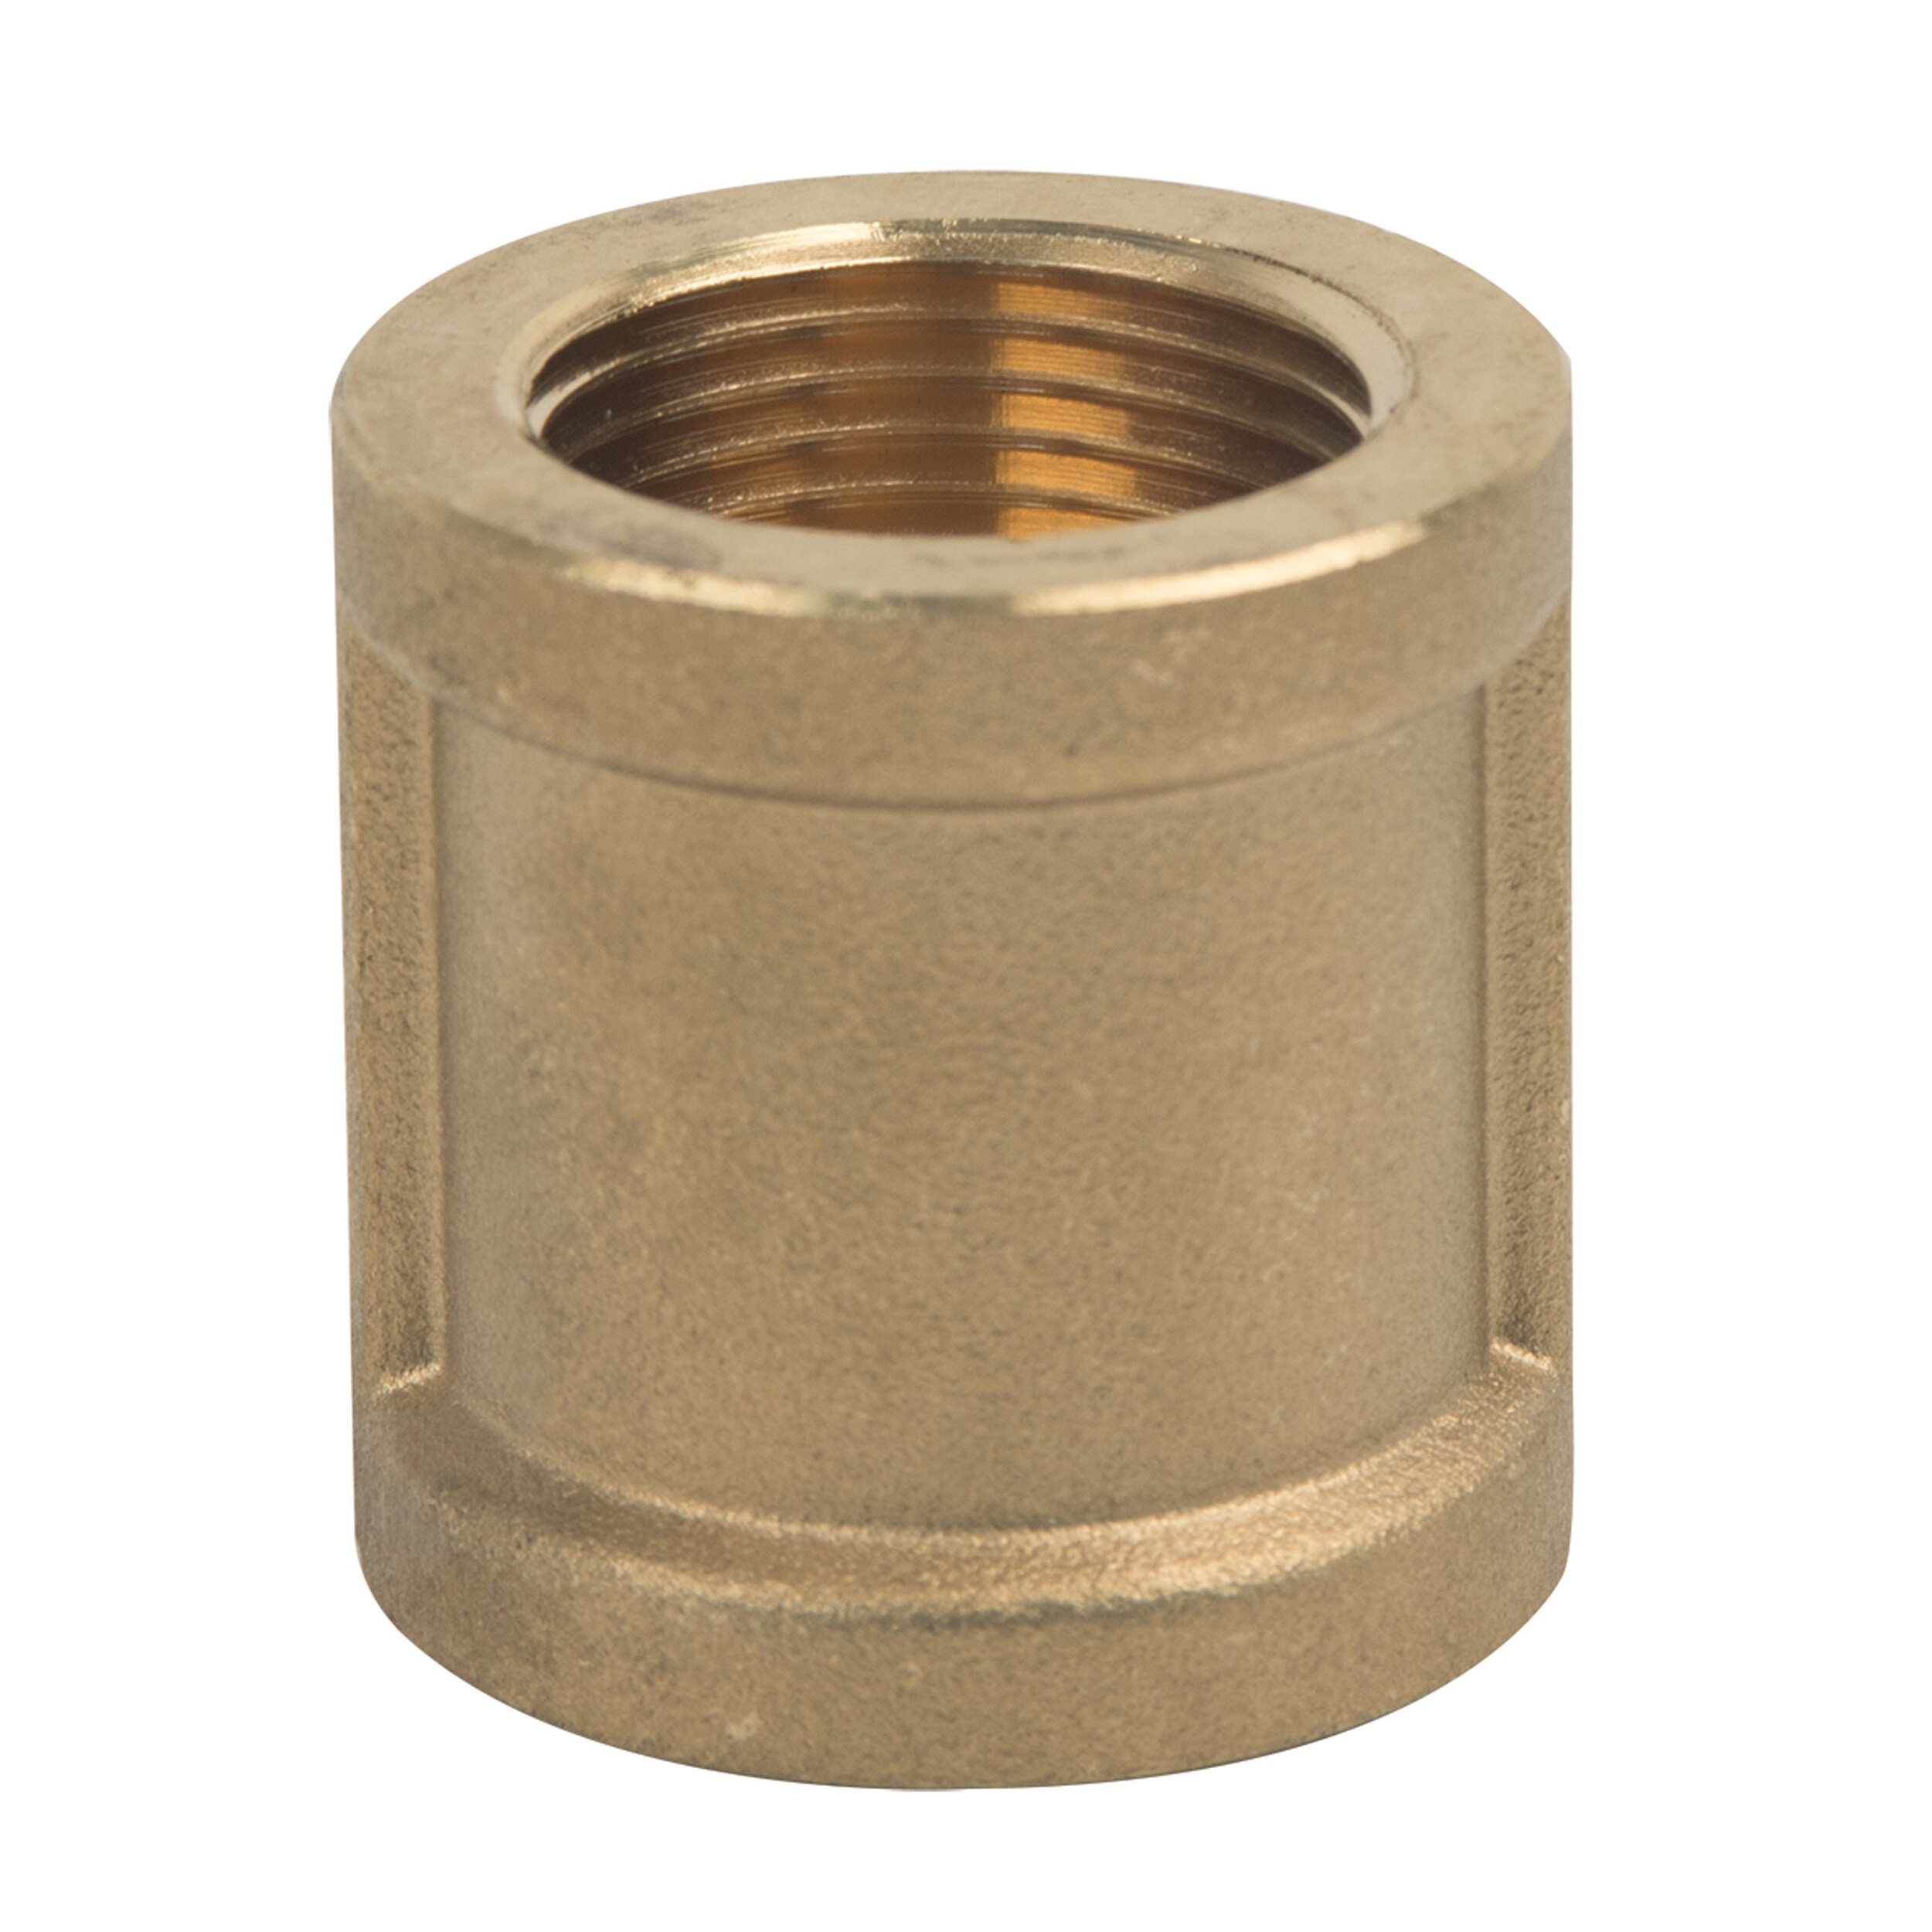 Brass Union Fitting, Size: 3/4 inch, for Hydraulic Pipe at best